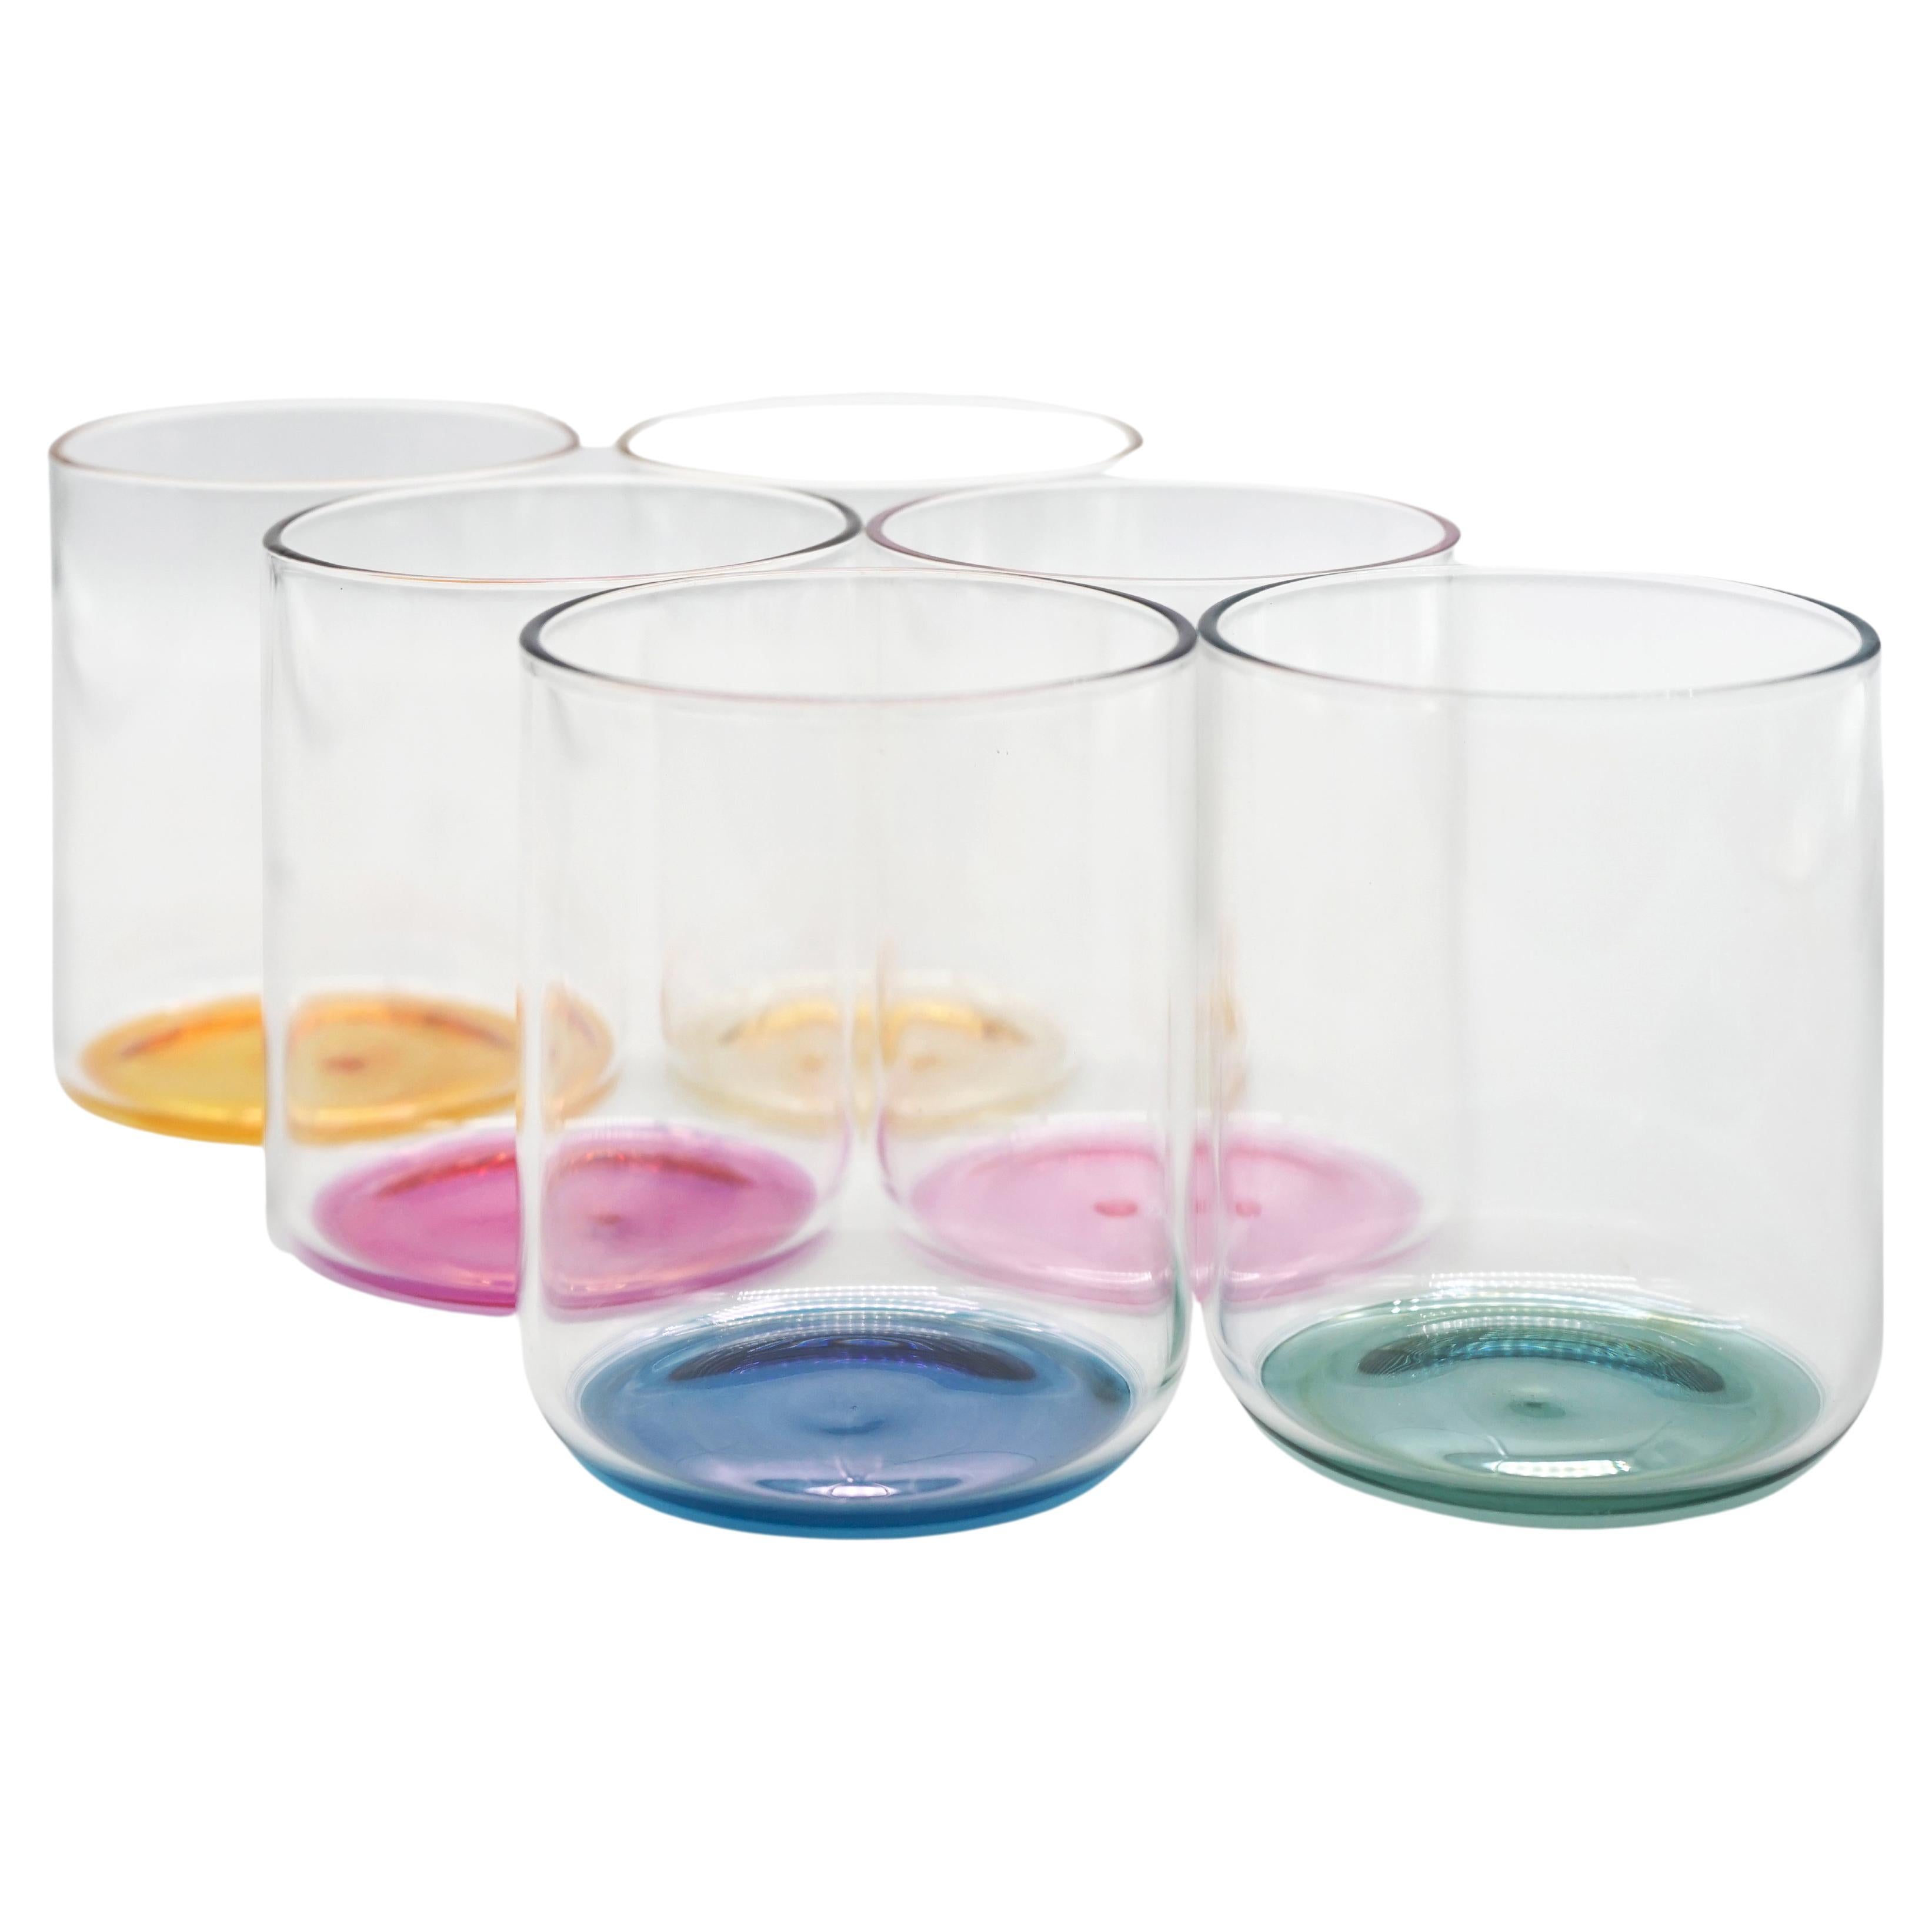 21st Century Set of 6 Colored Glass, Hand-Crafted, Kanz Architetti Designed